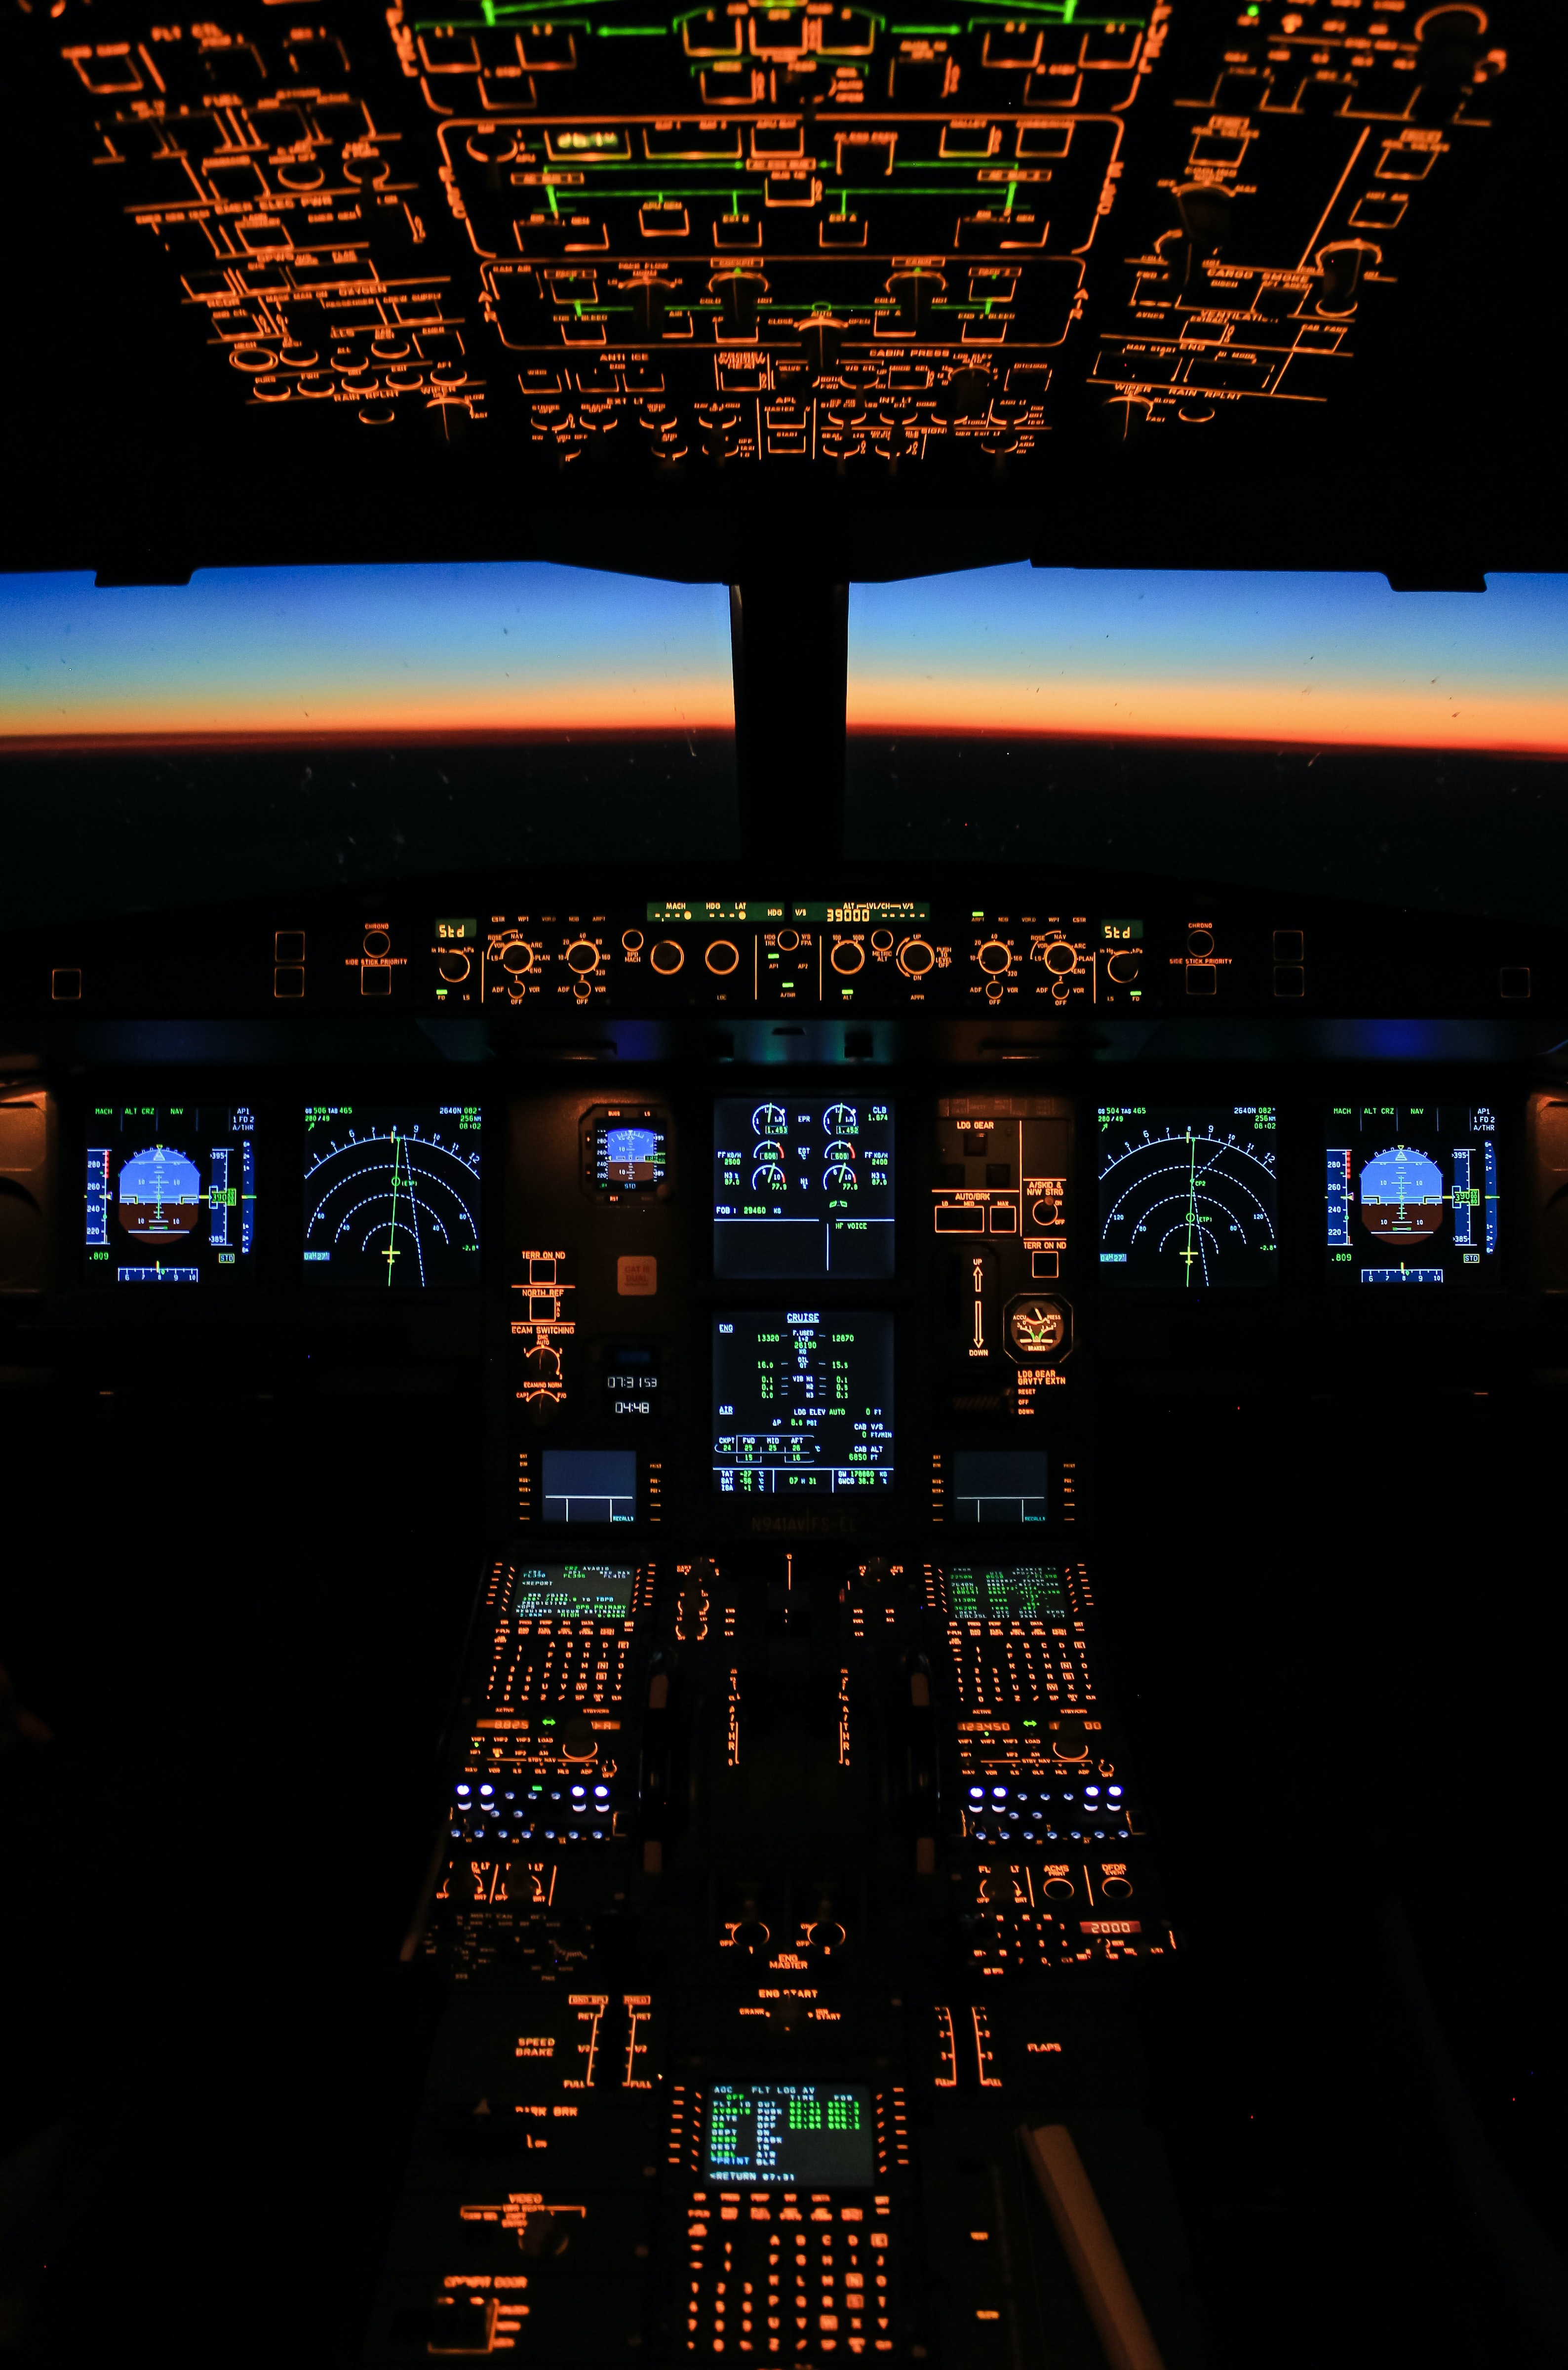 technology, plane, airplane, buttons, technologies, evening, panel, cabin, display cellphone